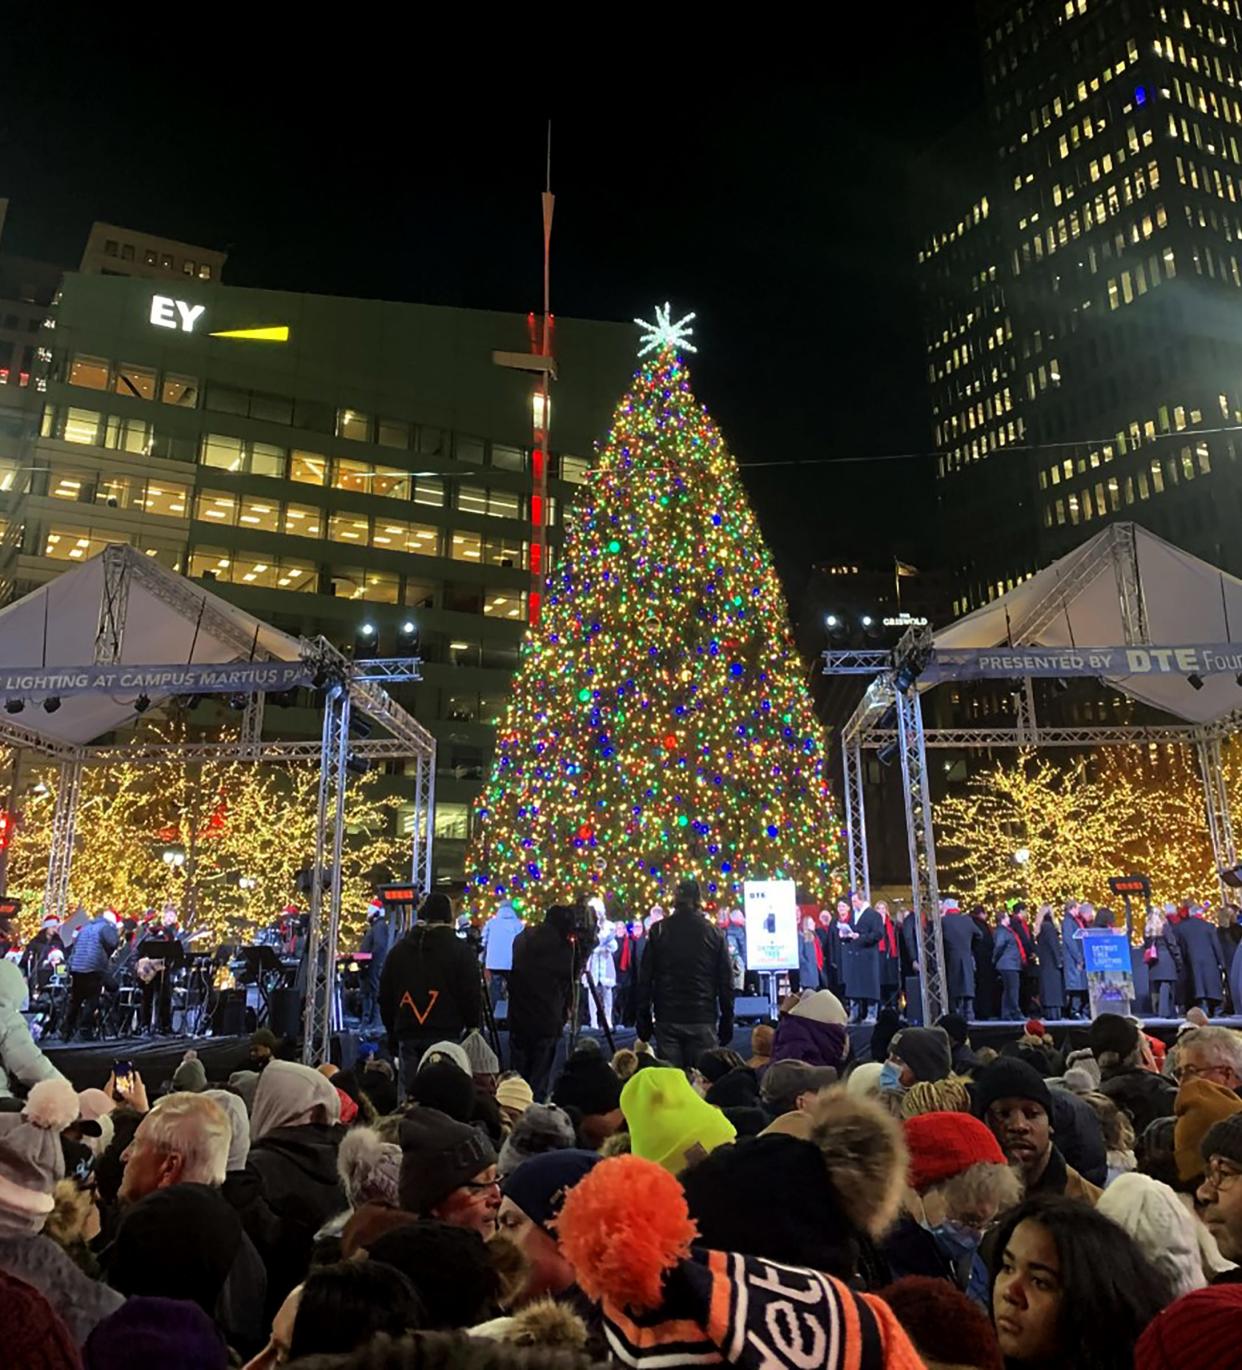 Hundreds attended the annual Christmas tree lighting was held at Campus Martius on Nov.19, 2021. The event featured food trucks and entertainment on the ice rink and stage.